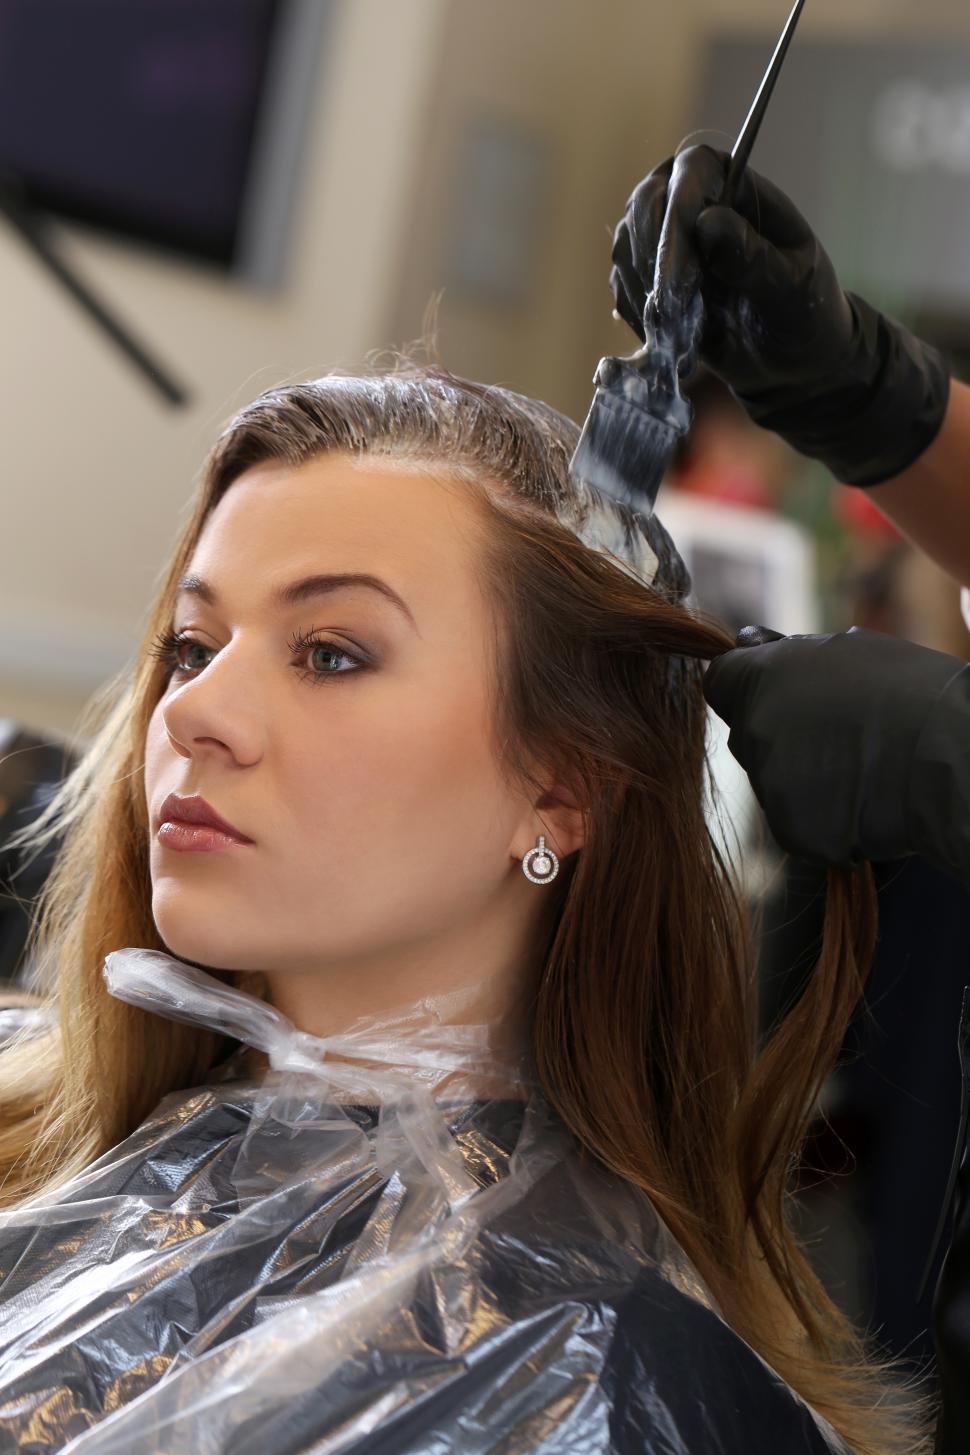 Download Free Stock Photo of Beauty, hairstyle. Hairdresser working in a salon 